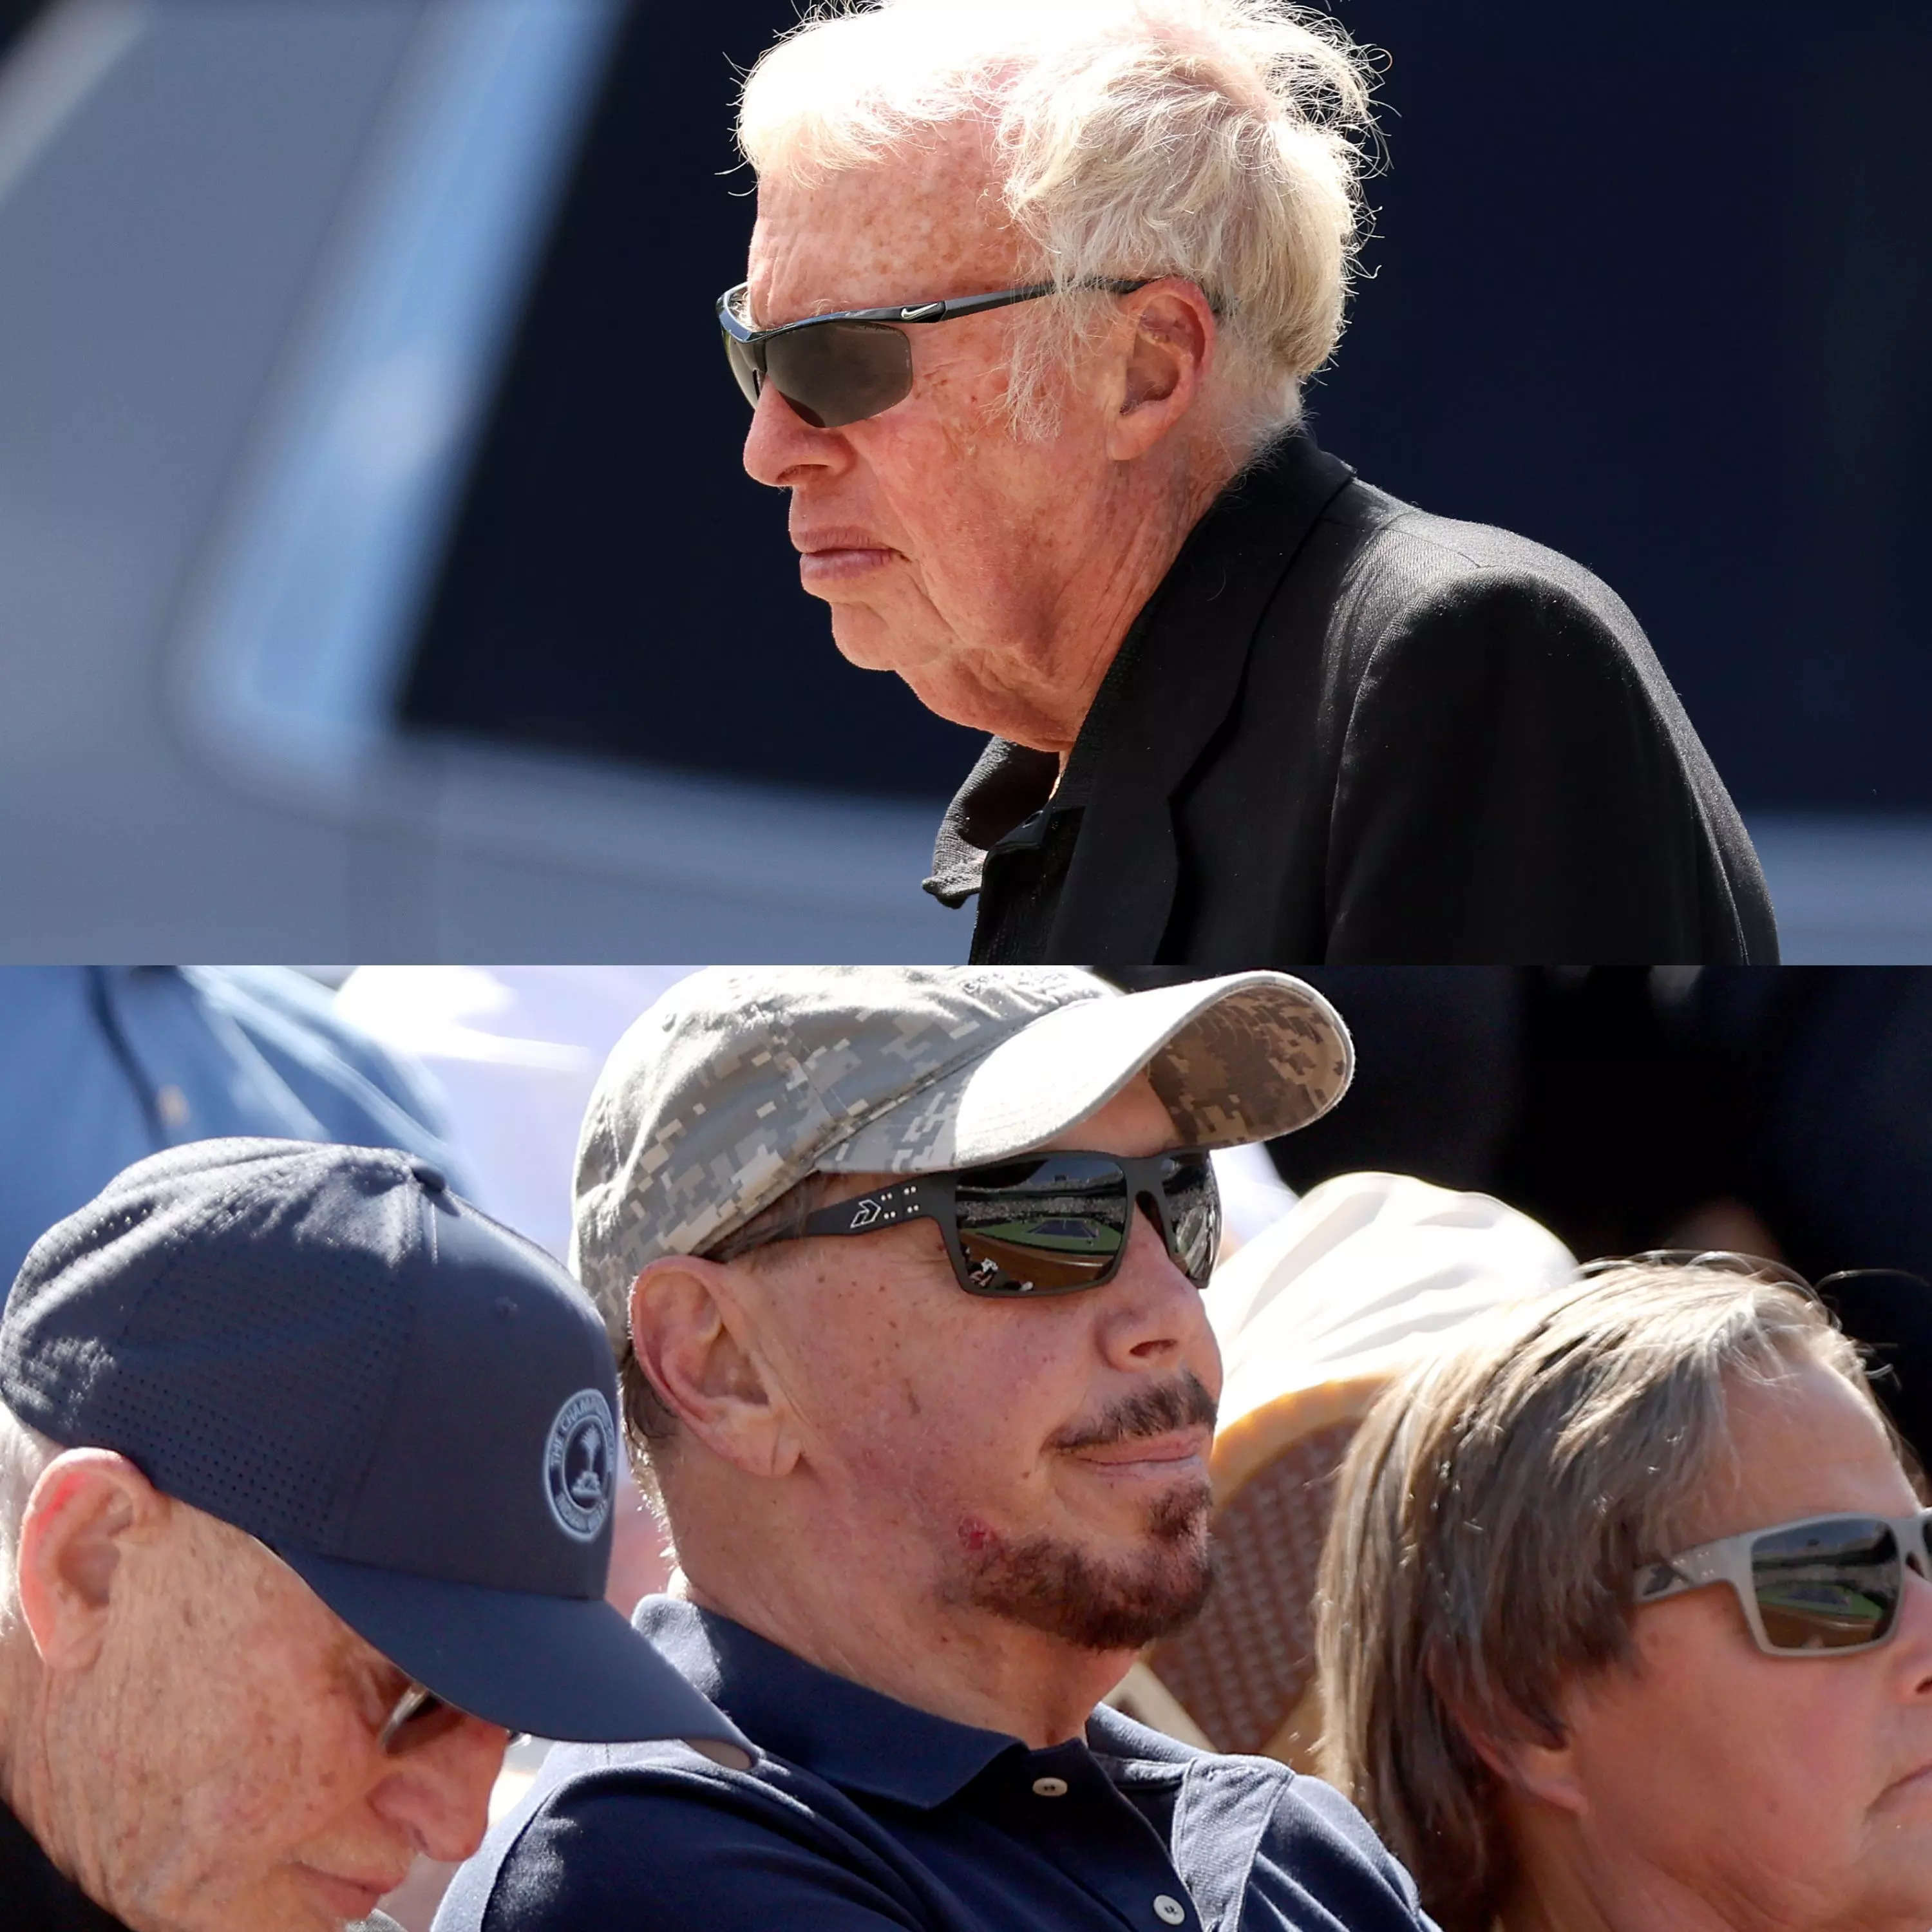 Phil Knight and Larry Ellison